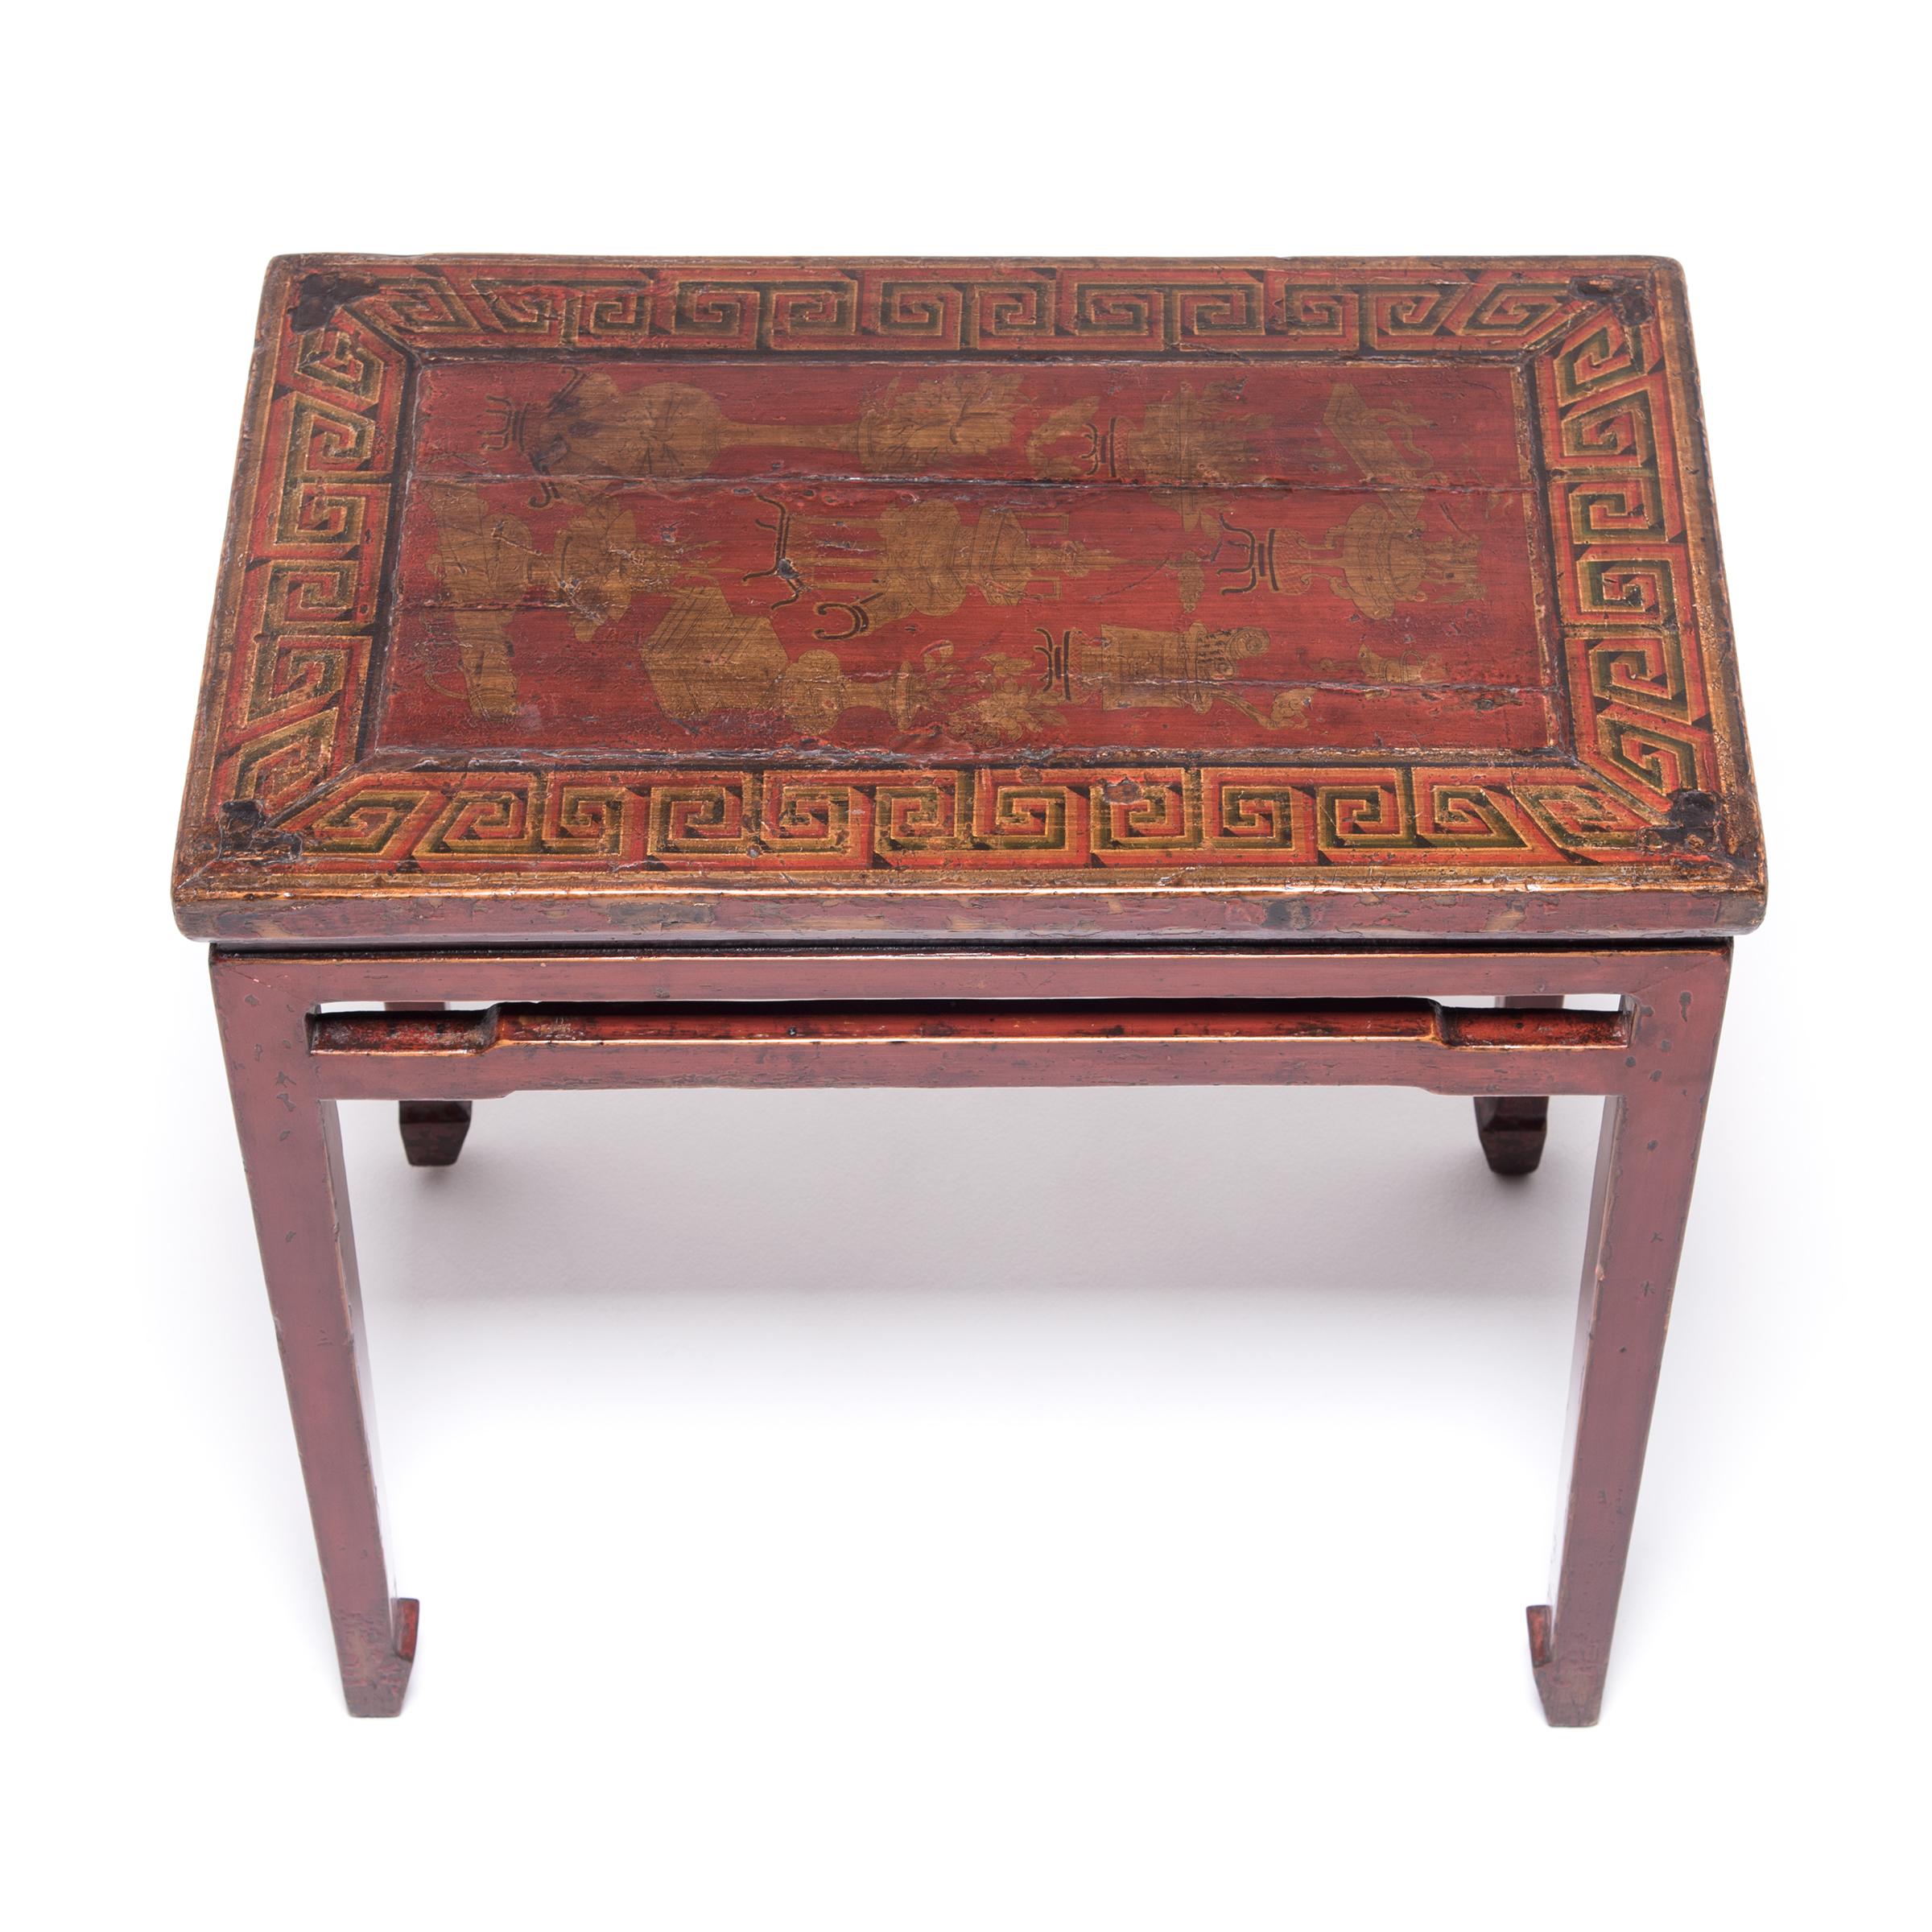 This mid-19th century console table was likely used as an offering table bearing incense. Appealing to the rarified taste of China’s literati, this Qing-dynasty table depicts auspicious objects found in a scholar’s studio. Atop the gorgeous red